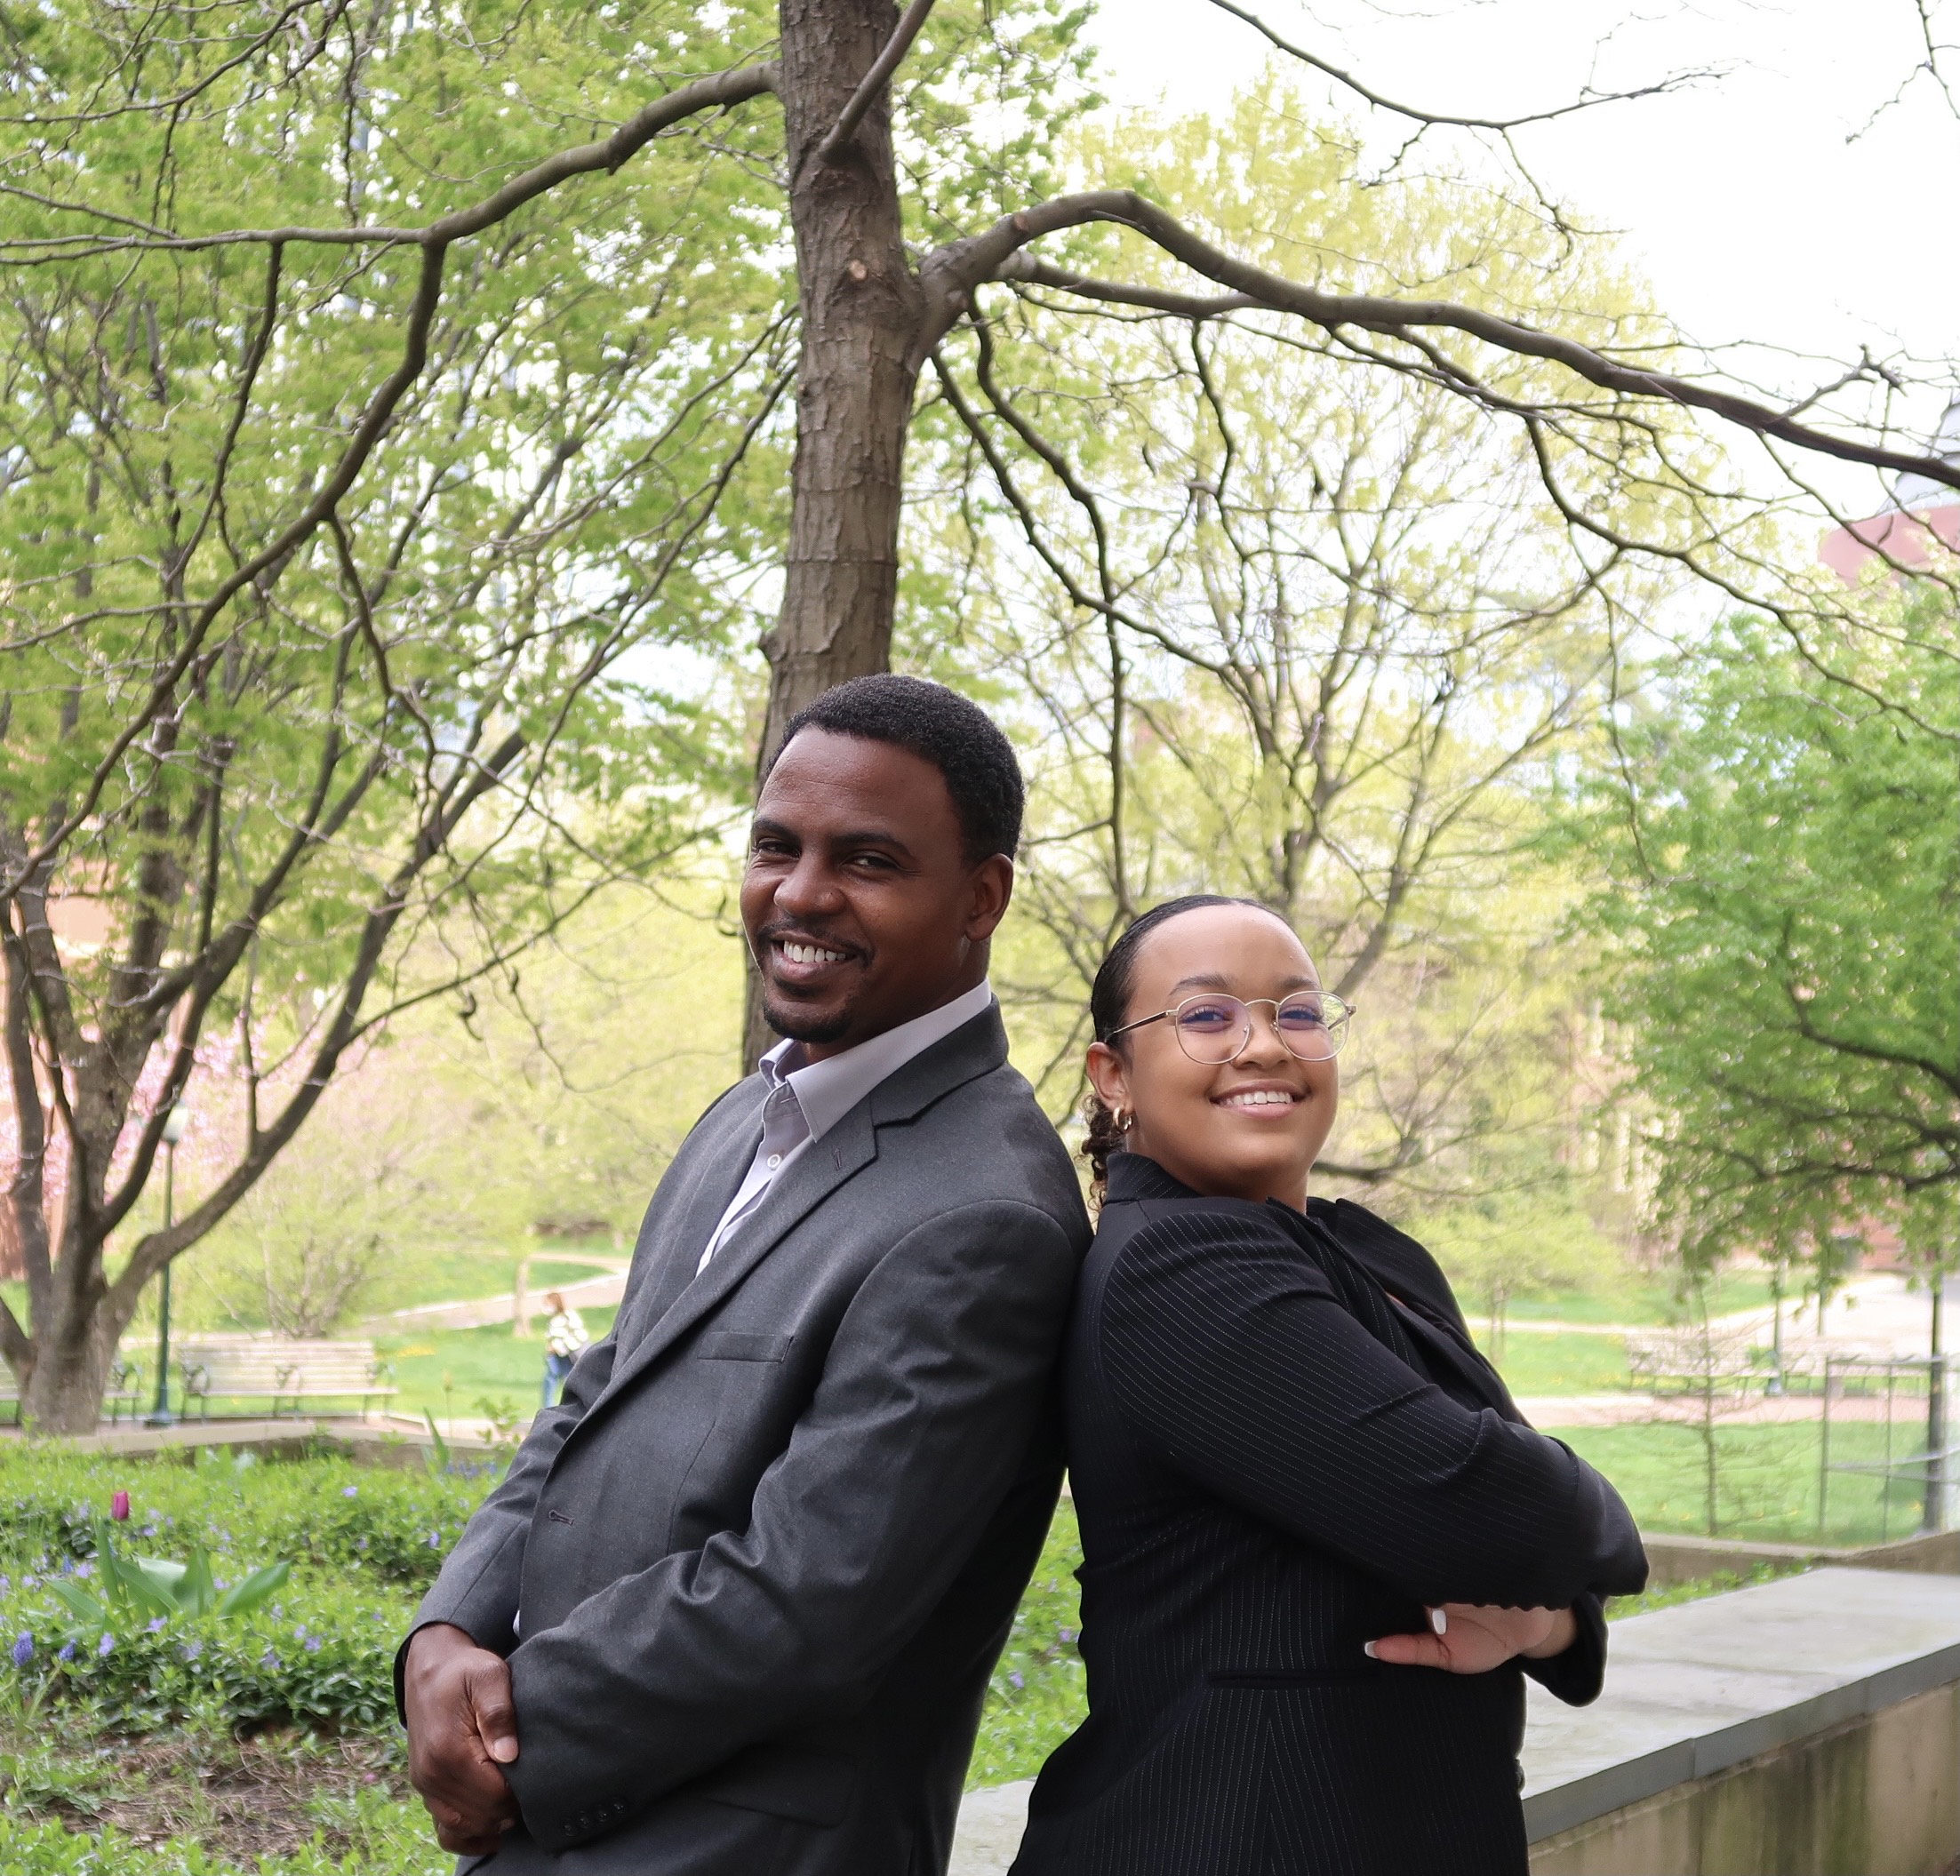 Kaiyla and Daniel Gillion pose for a photo outside on campus